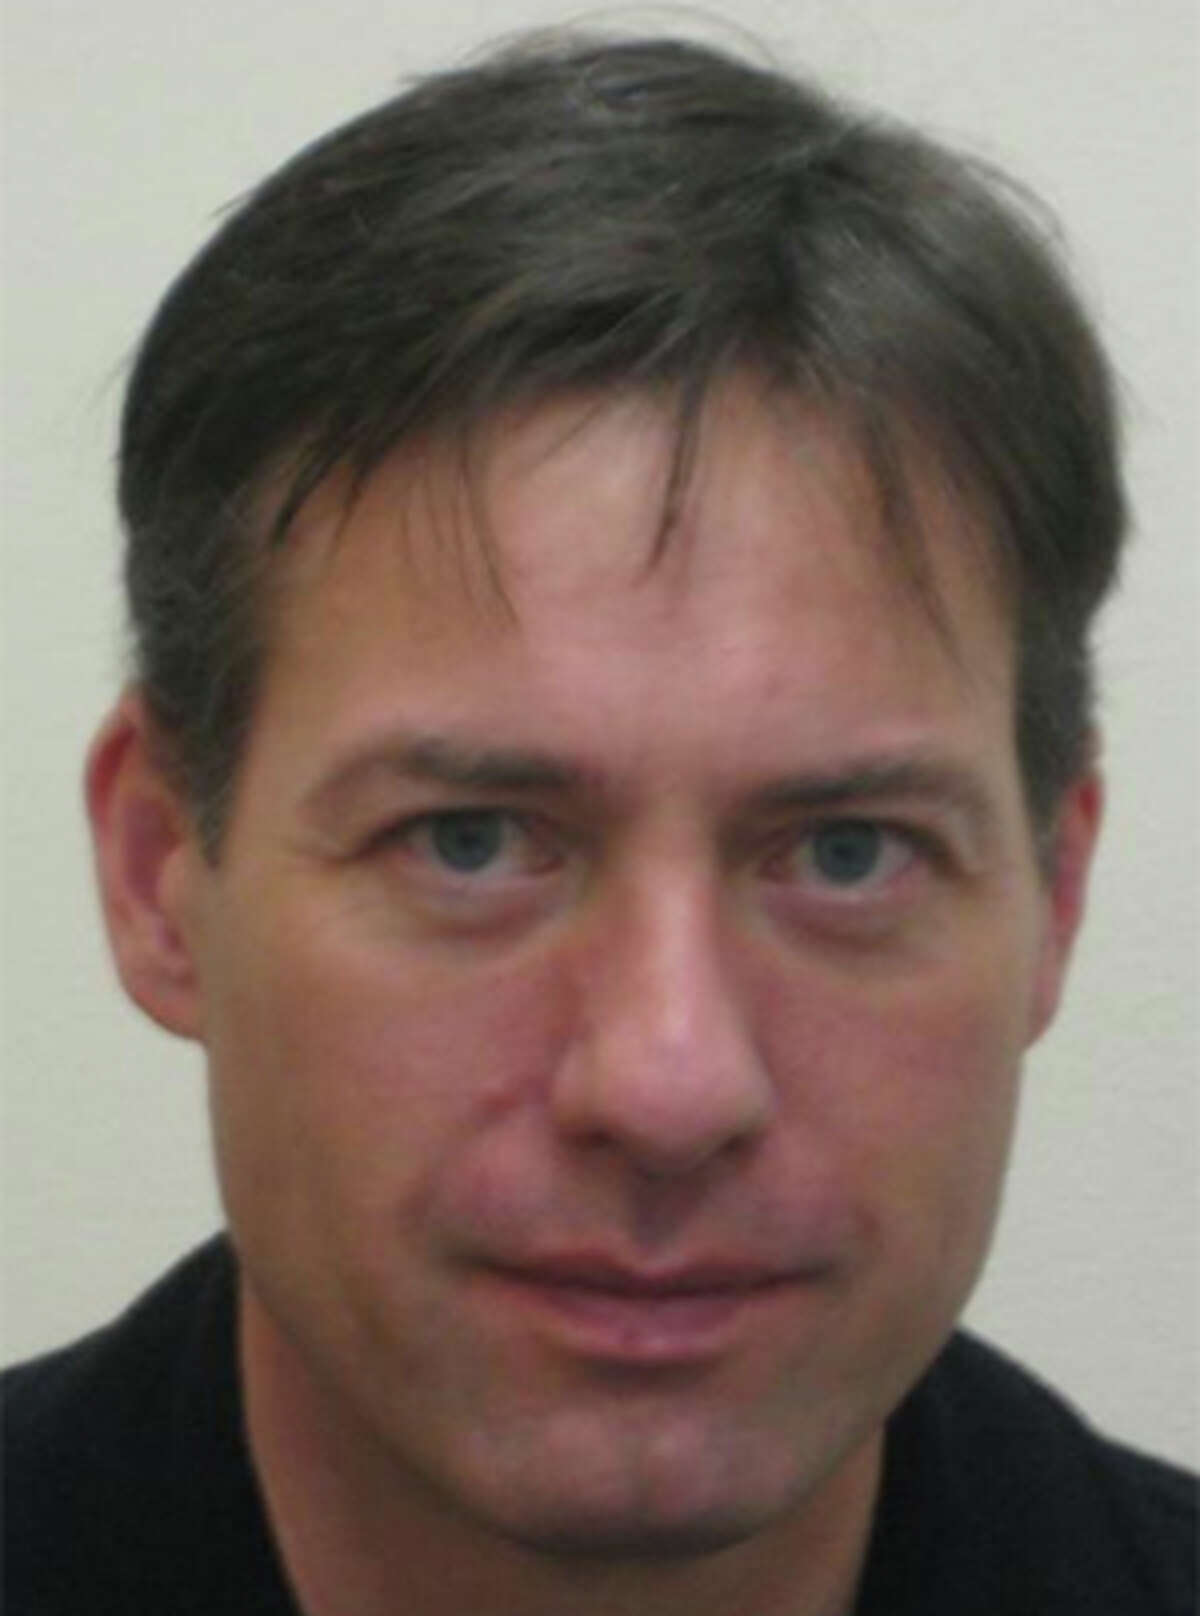 Tracy McDonald, pictured in a Snohomish County Sheriff's Office photo.